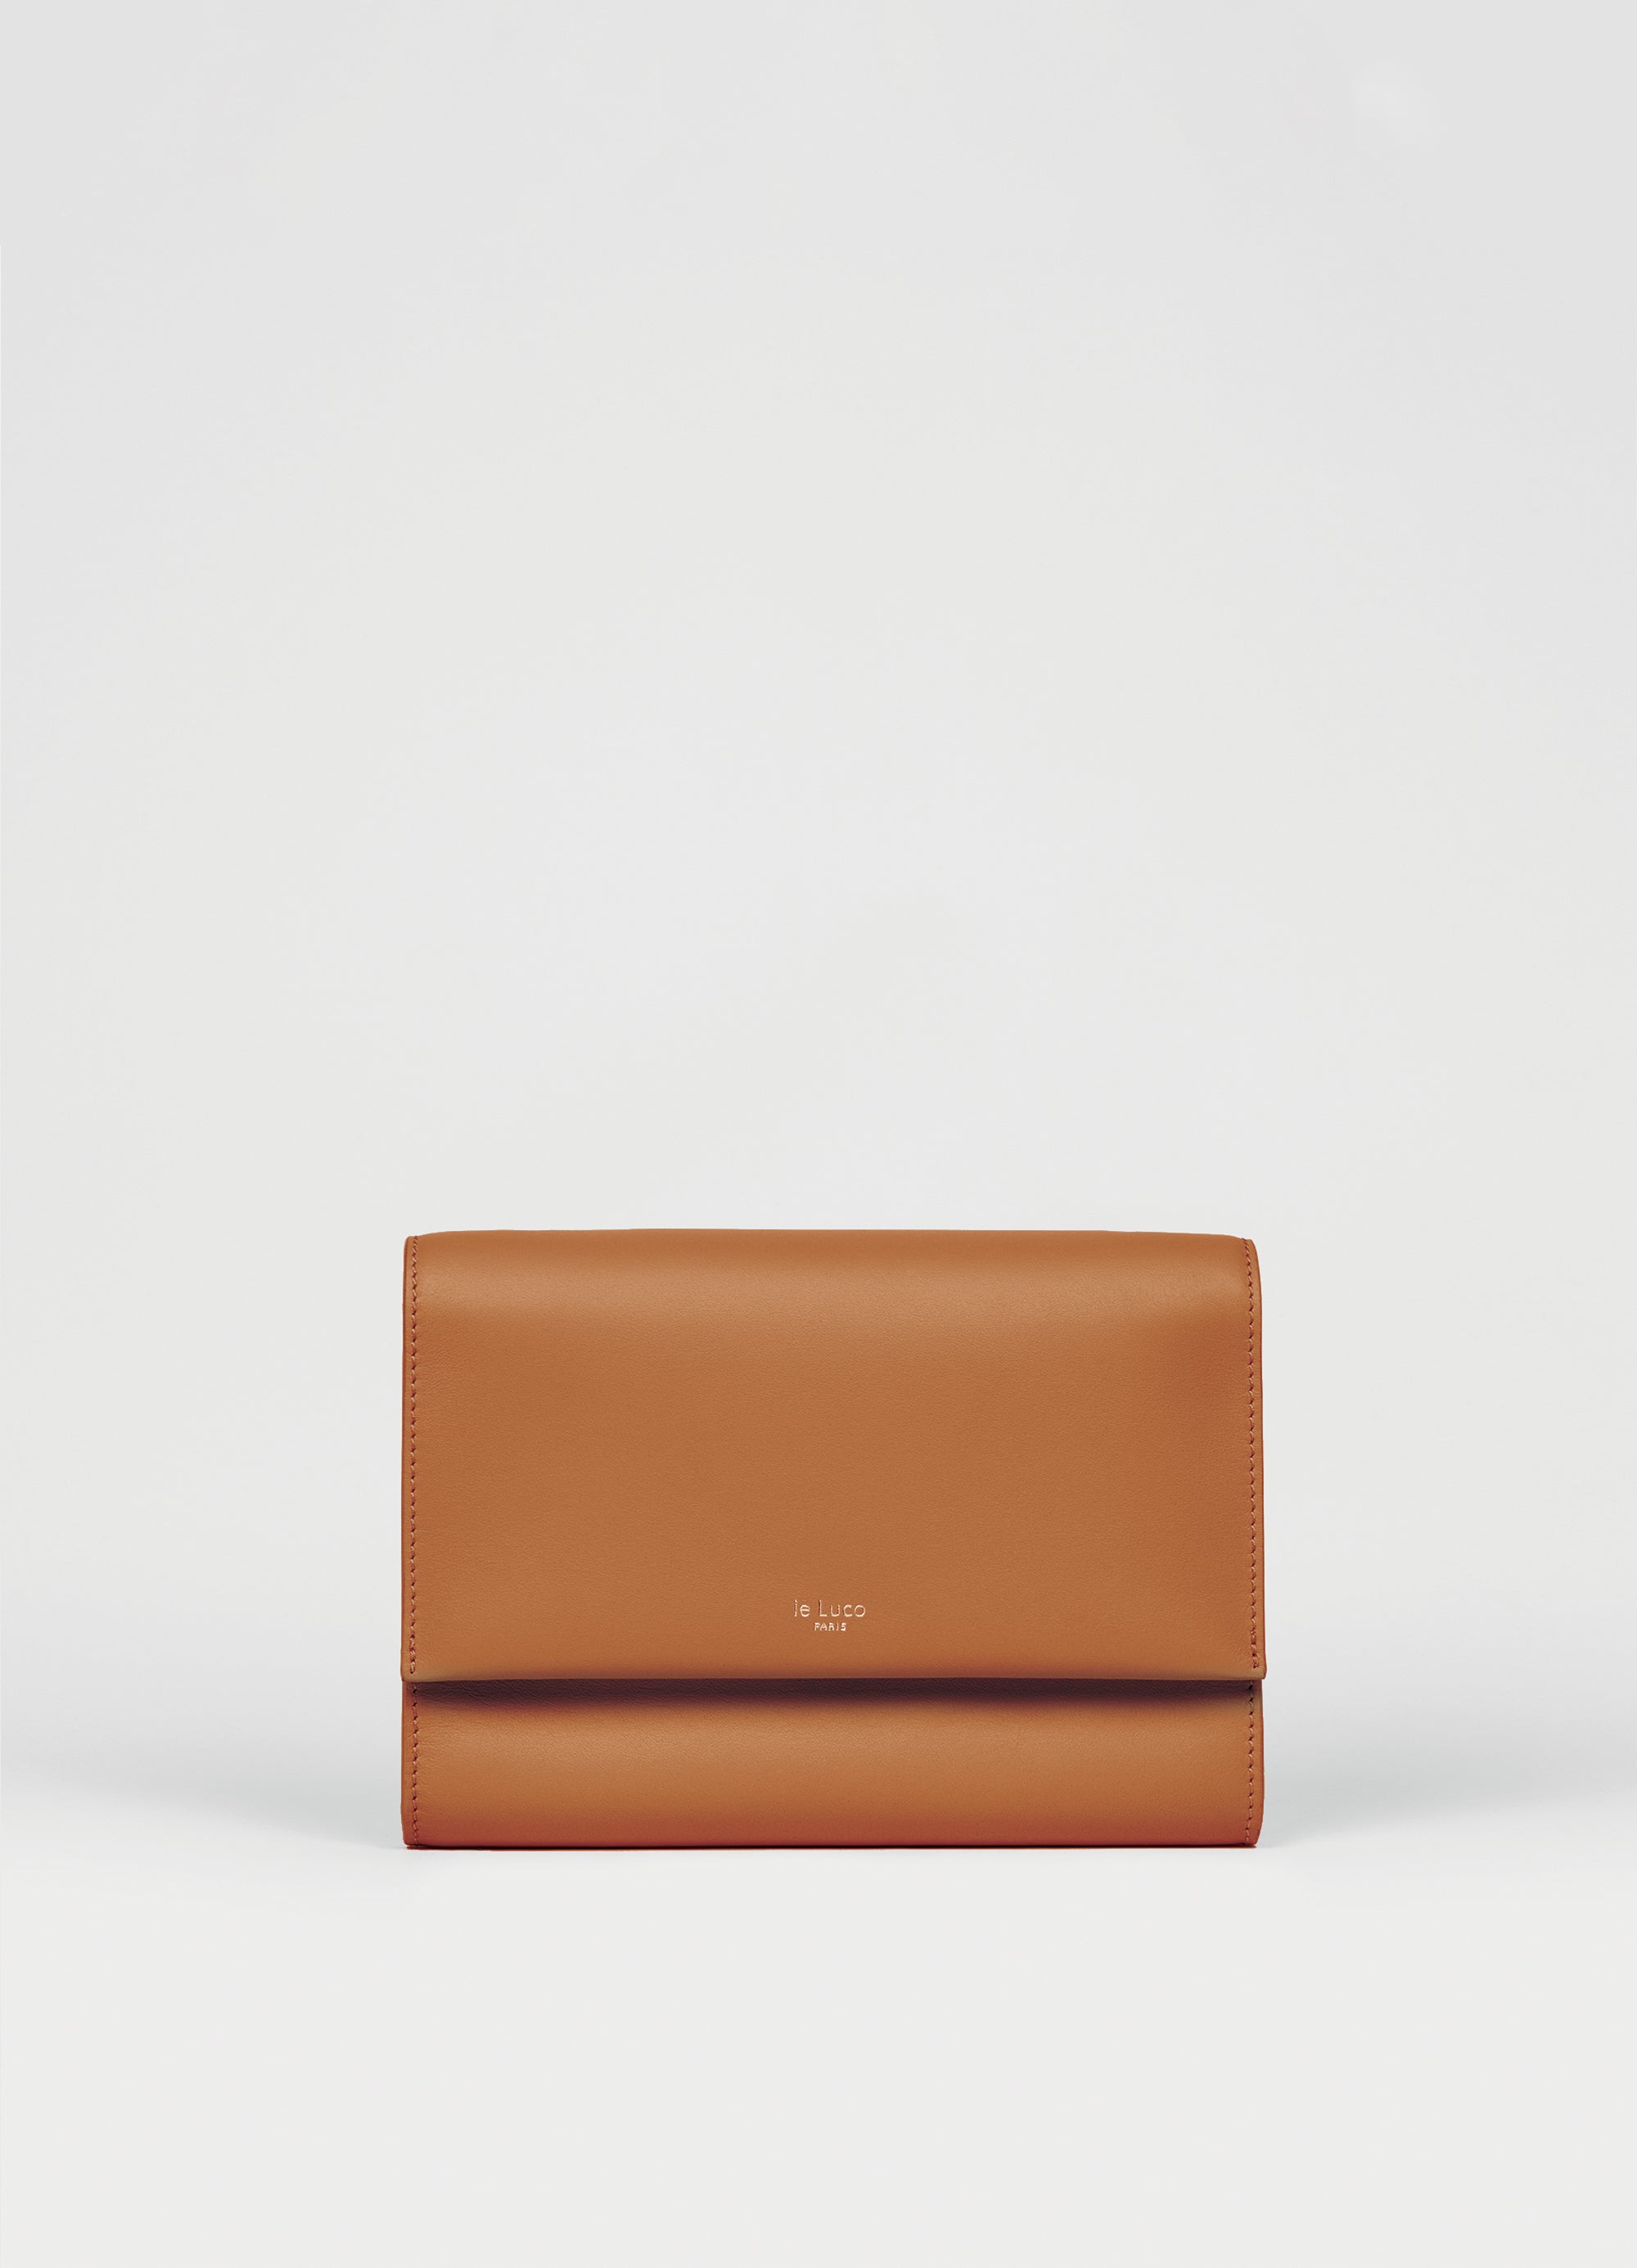 Court carré fawn brown